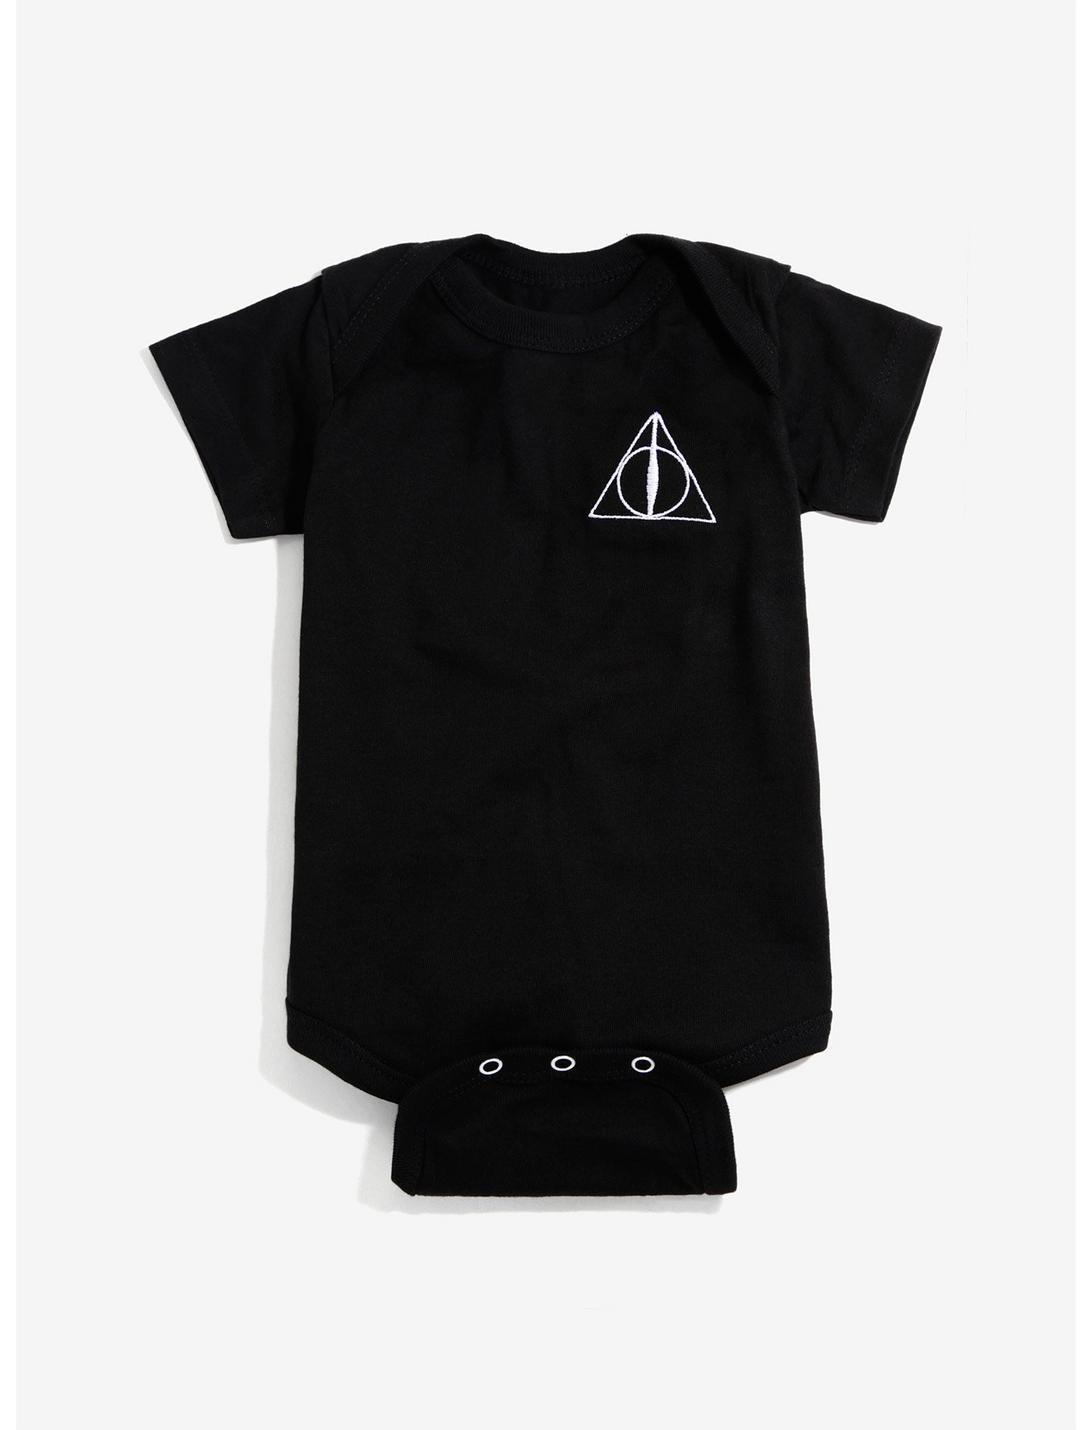 Harry Potter The Deathly Hallows Baby Bodysuit, BLACK, hi-res